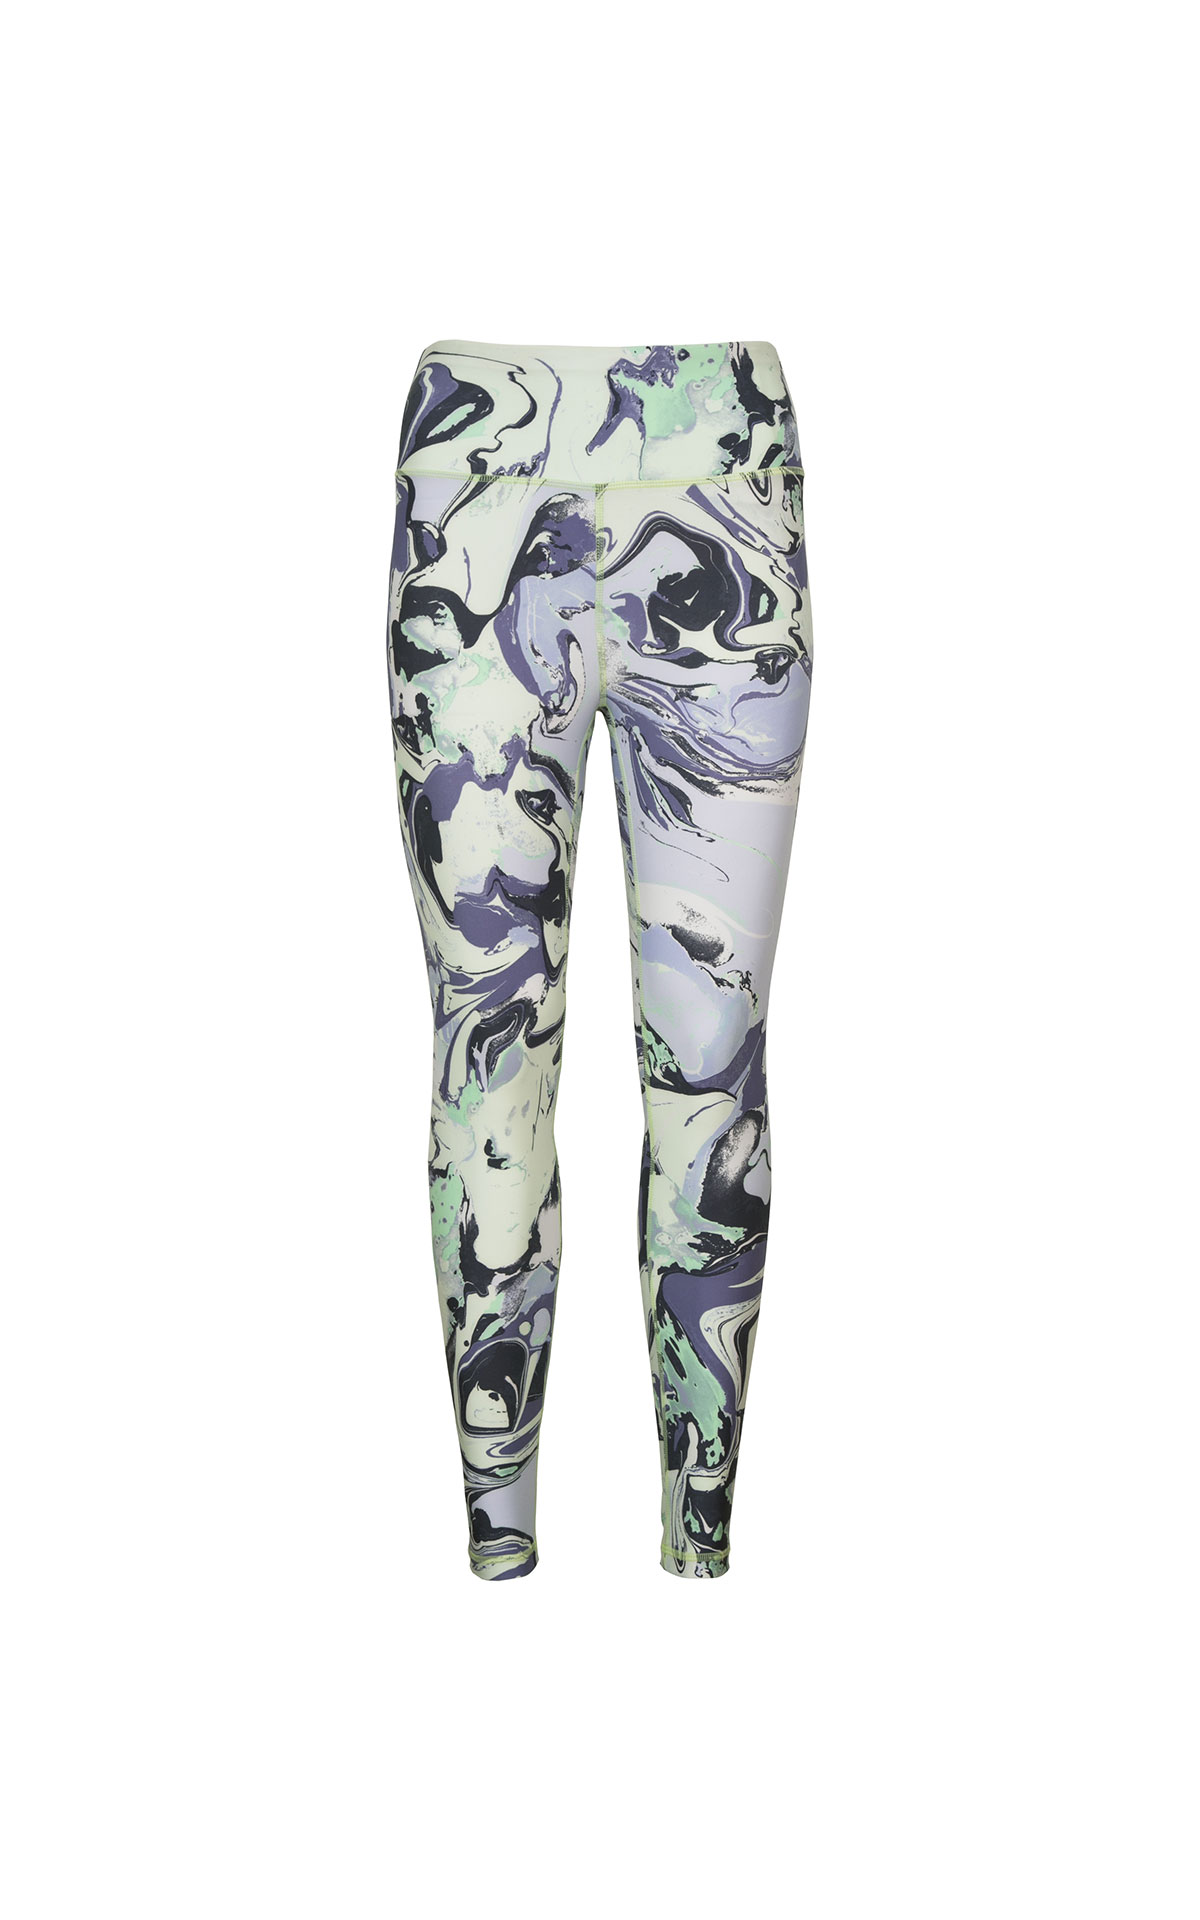 DKNY Marble Print High Waist Legging from Bicester Village